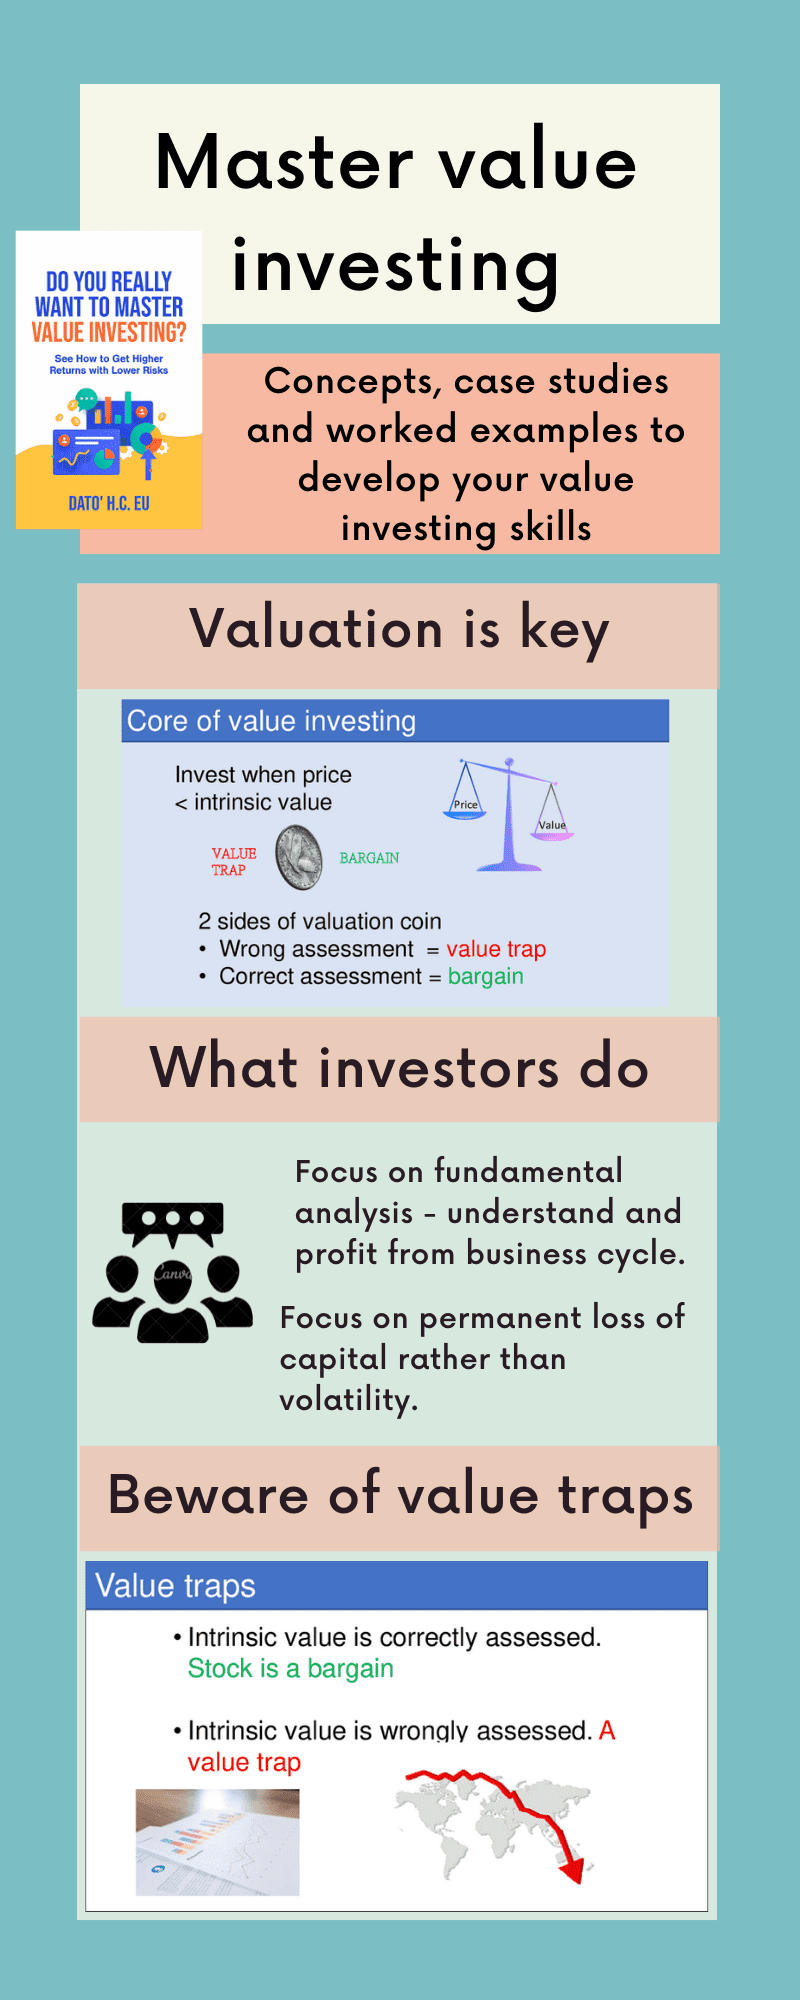 What a typical value investor does